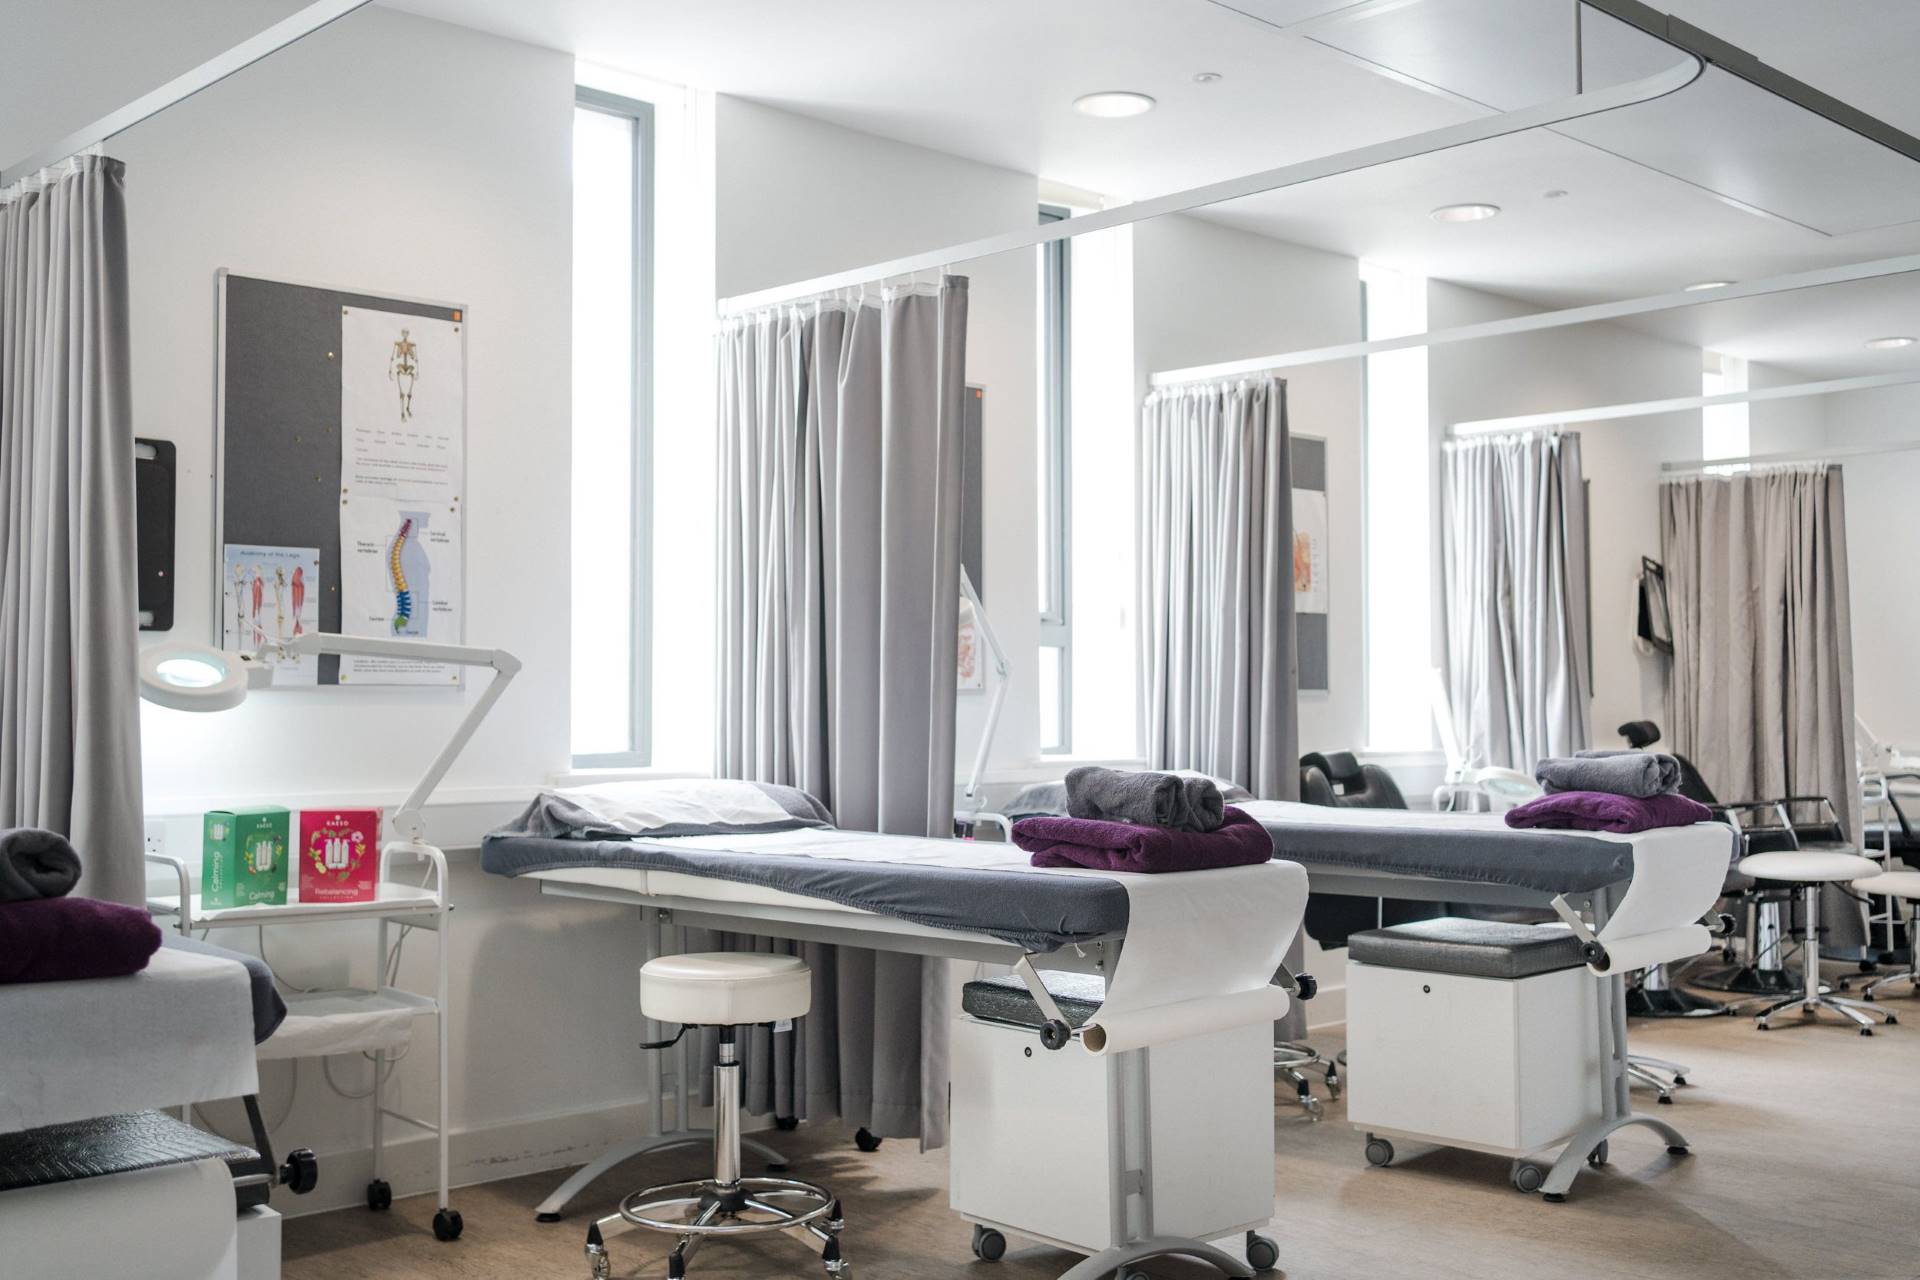 Harrogate College beauty therapy room